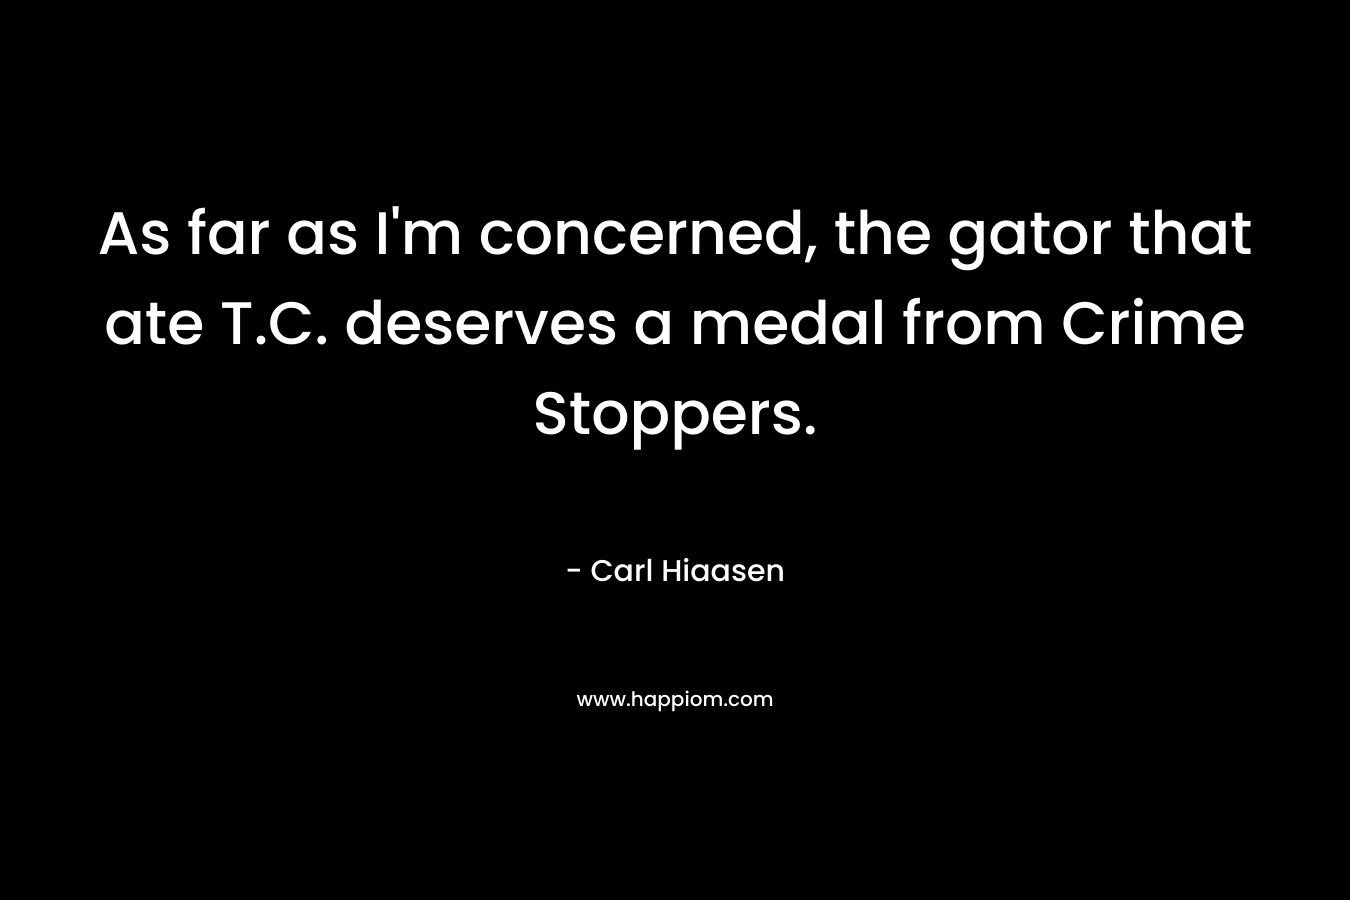 As far as I’m concerned, the gator that ate T.C. deserves a medal from Crime Stoppers. – Carl Hiaasen